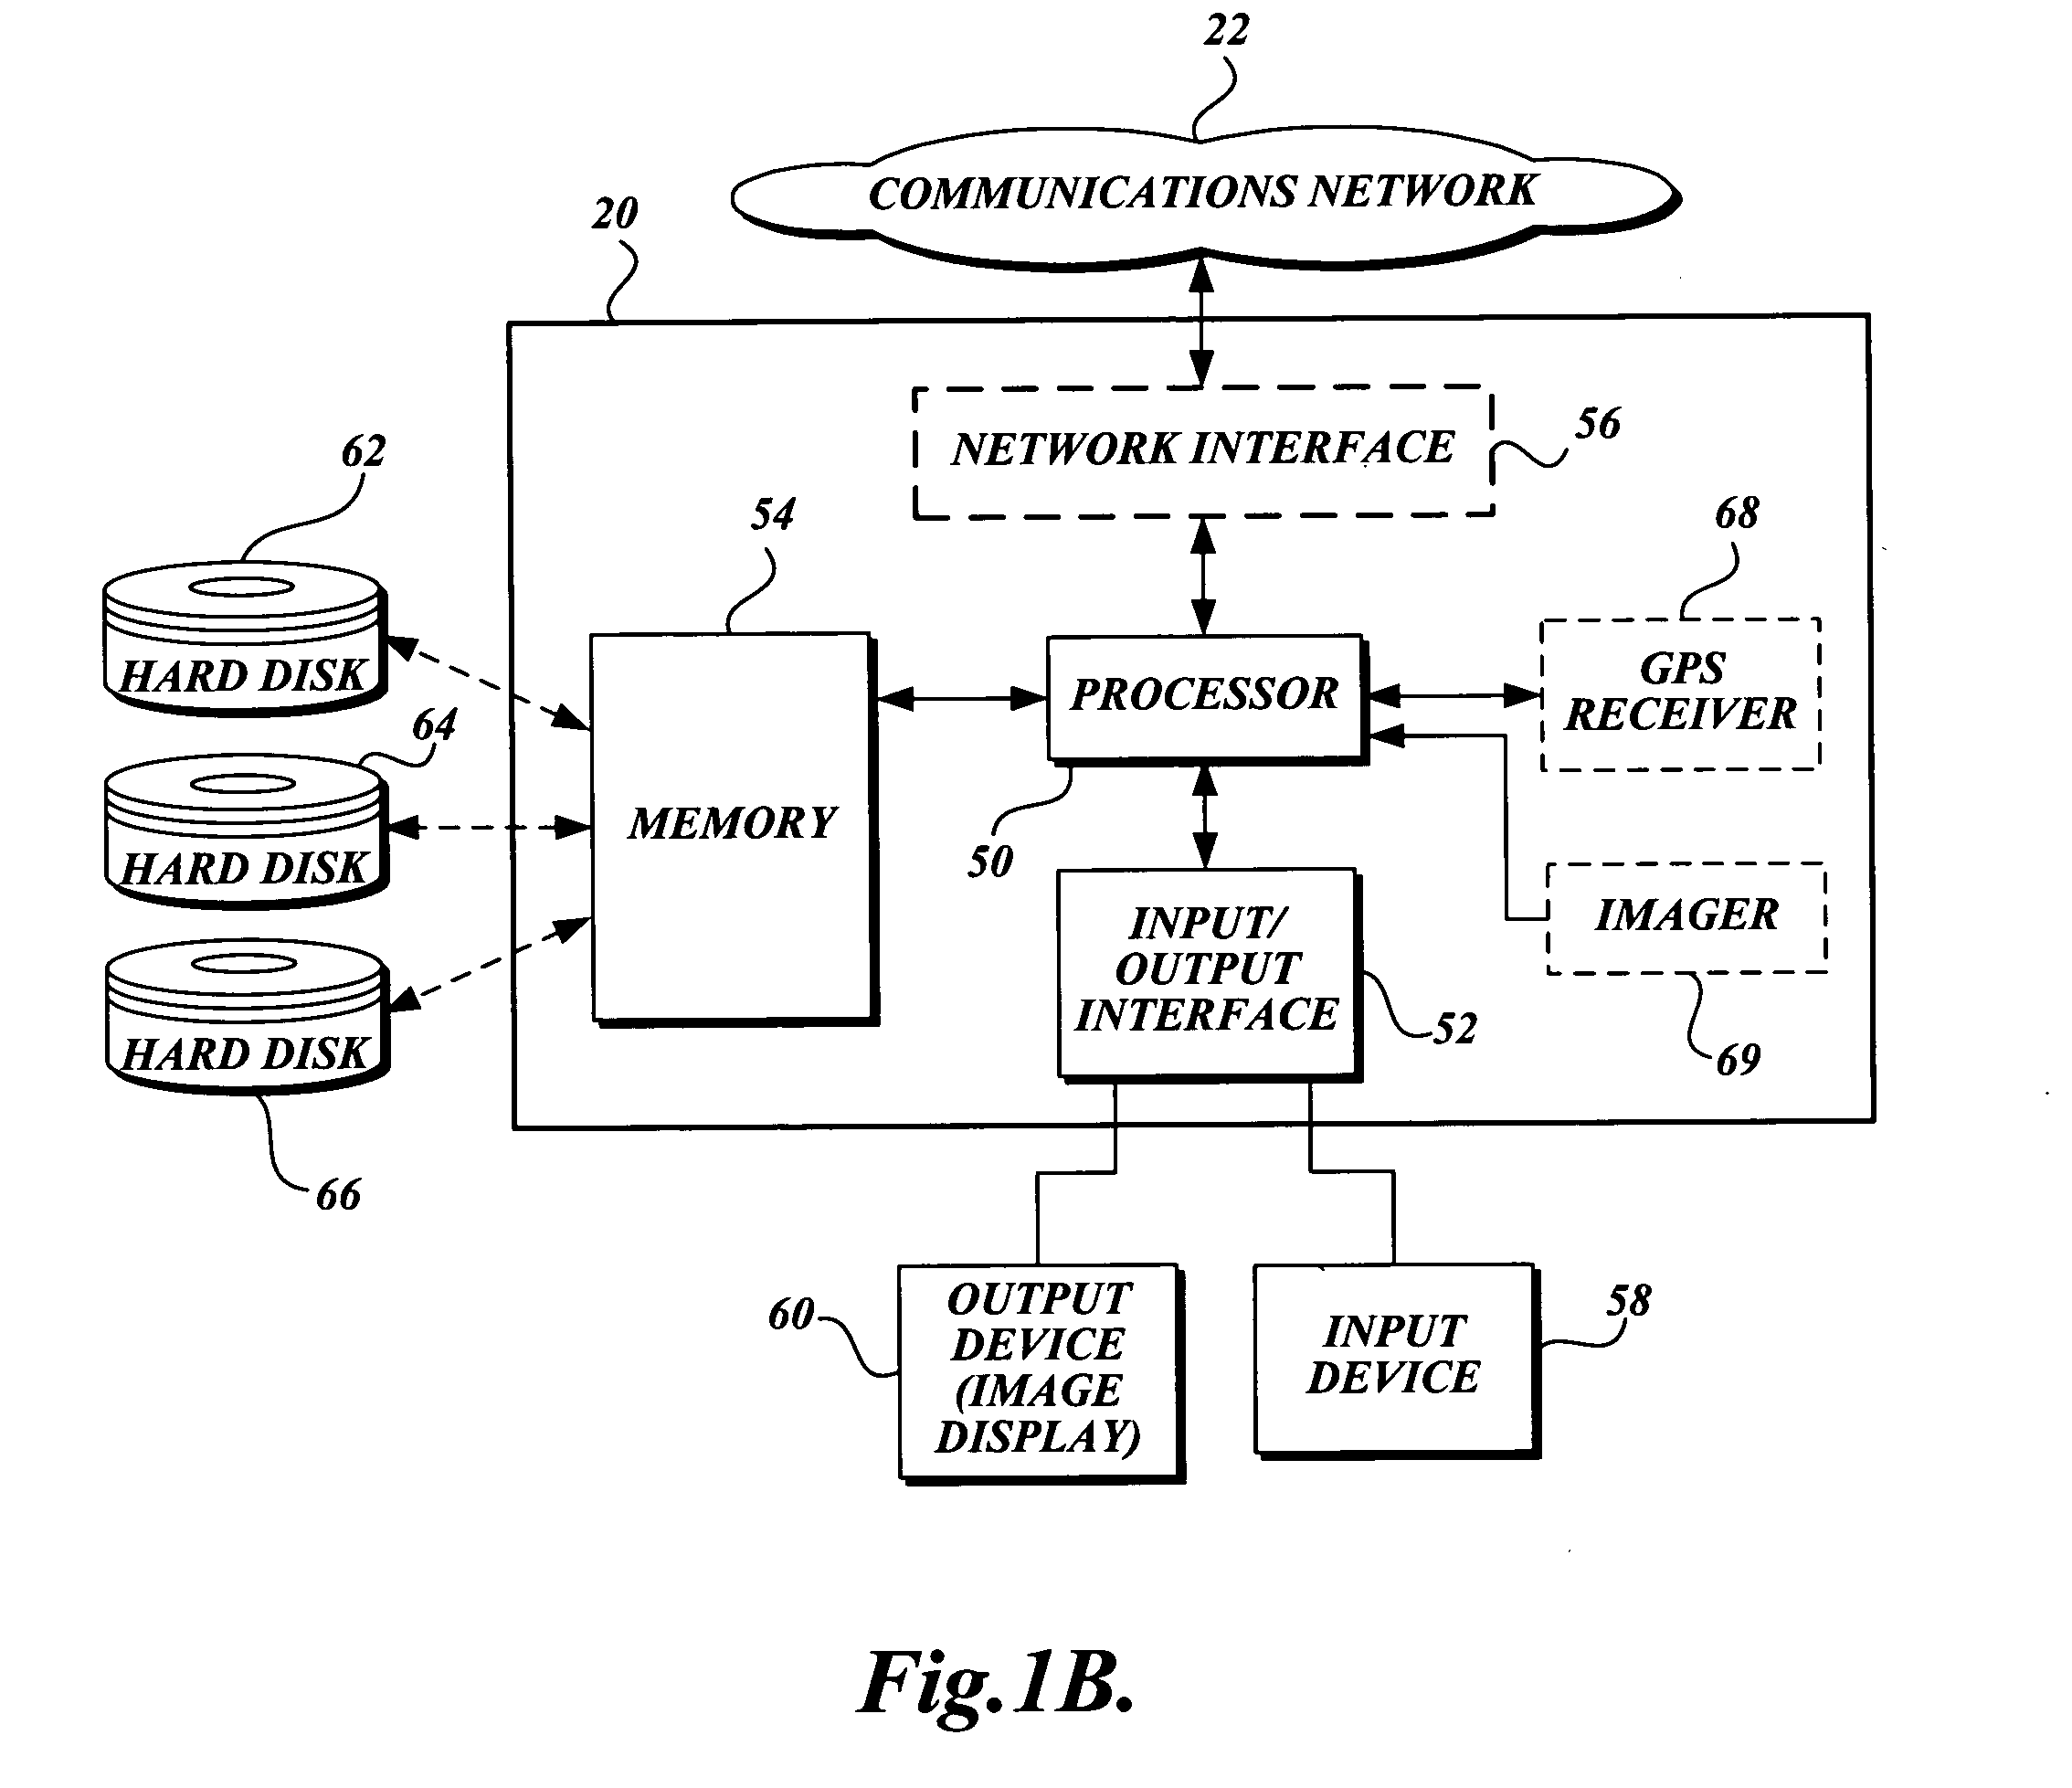 System and method for displaying location-specific images on a mobile device